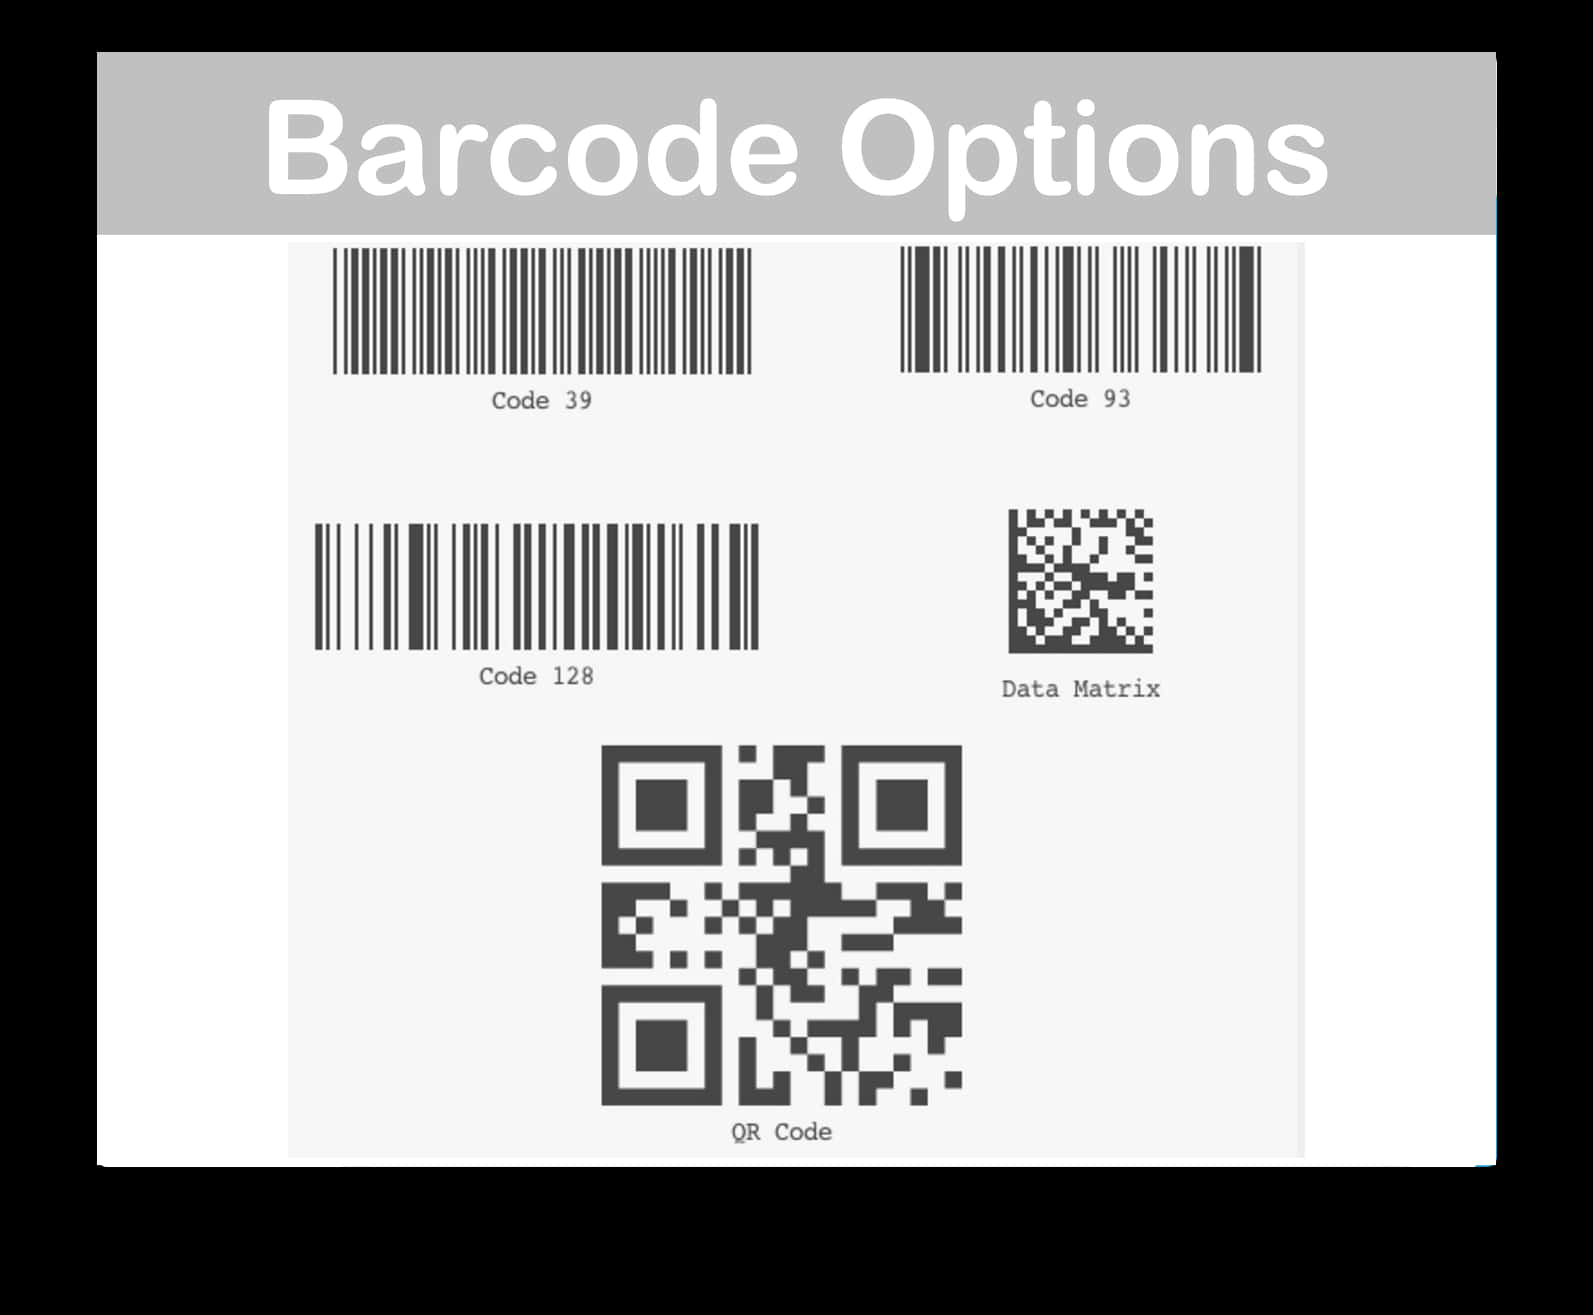 A Barcode Options On A White Background